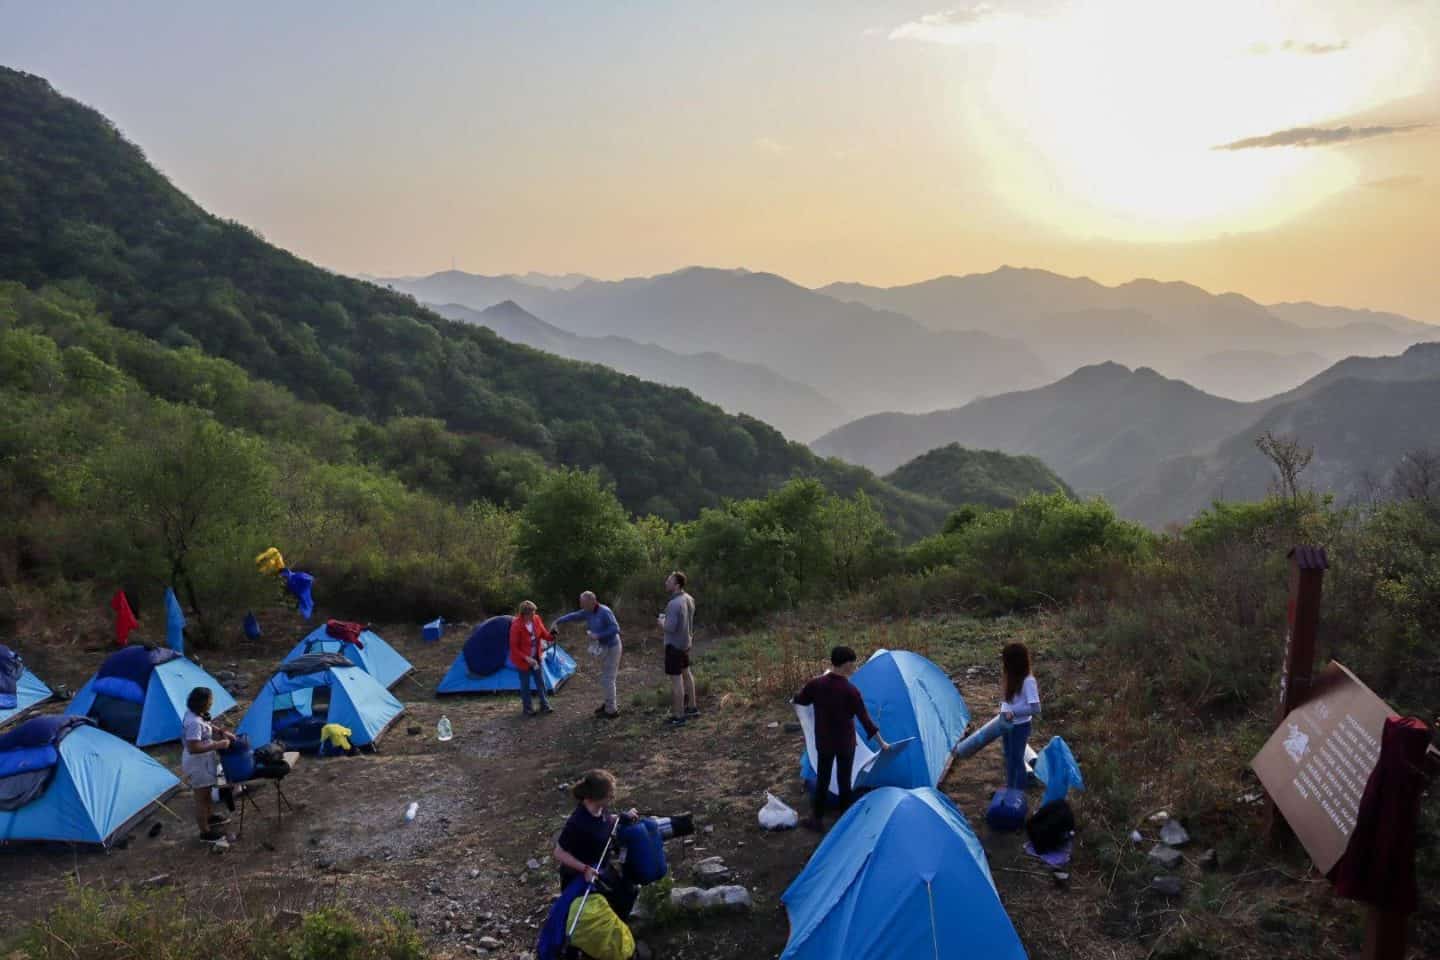 camping on Great Wall of China